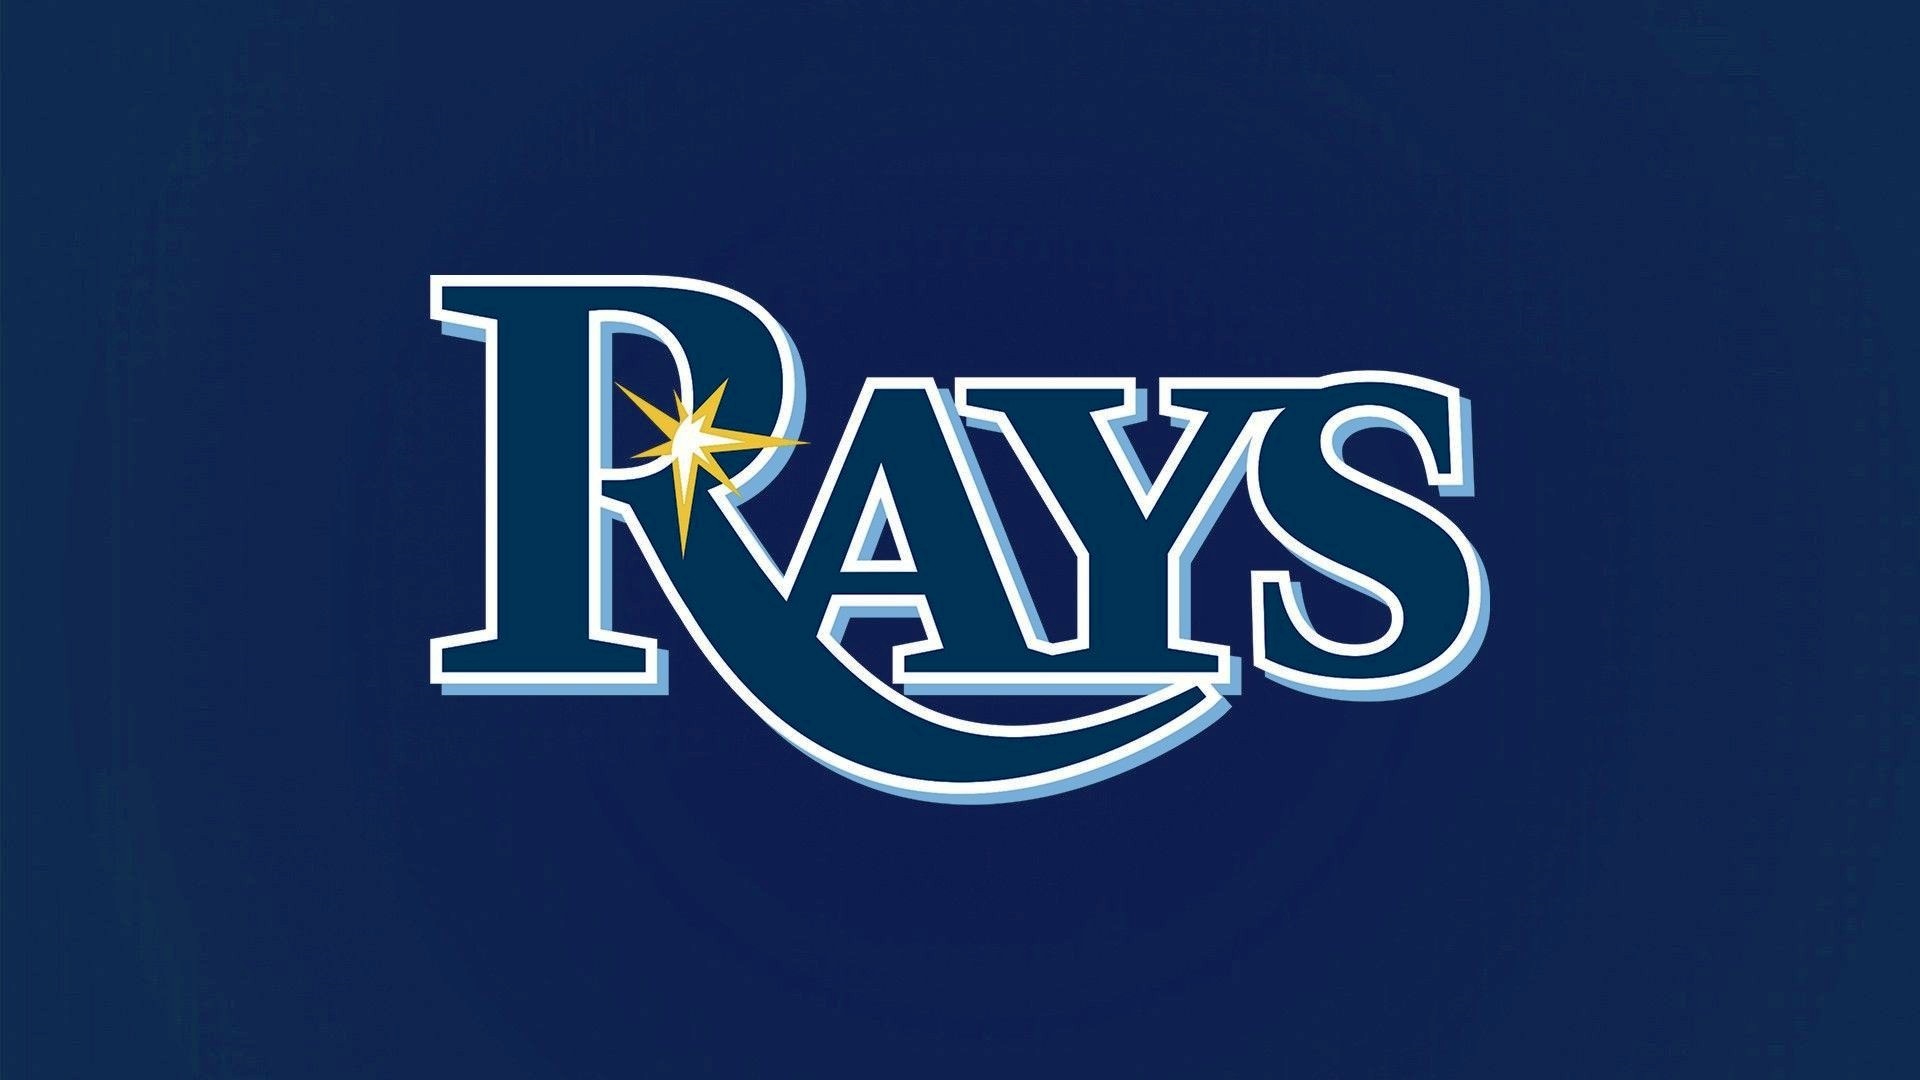 Tampa Bay Rays Logo Mac Wallpaper with high-resolution 1920x1080 pixel. You can use this wallpaper for Mac Desktop Wallpaper, Laptop Screensavers, Android Wallpapers, Tablet or iPhone Home Screen and another mobile phone device